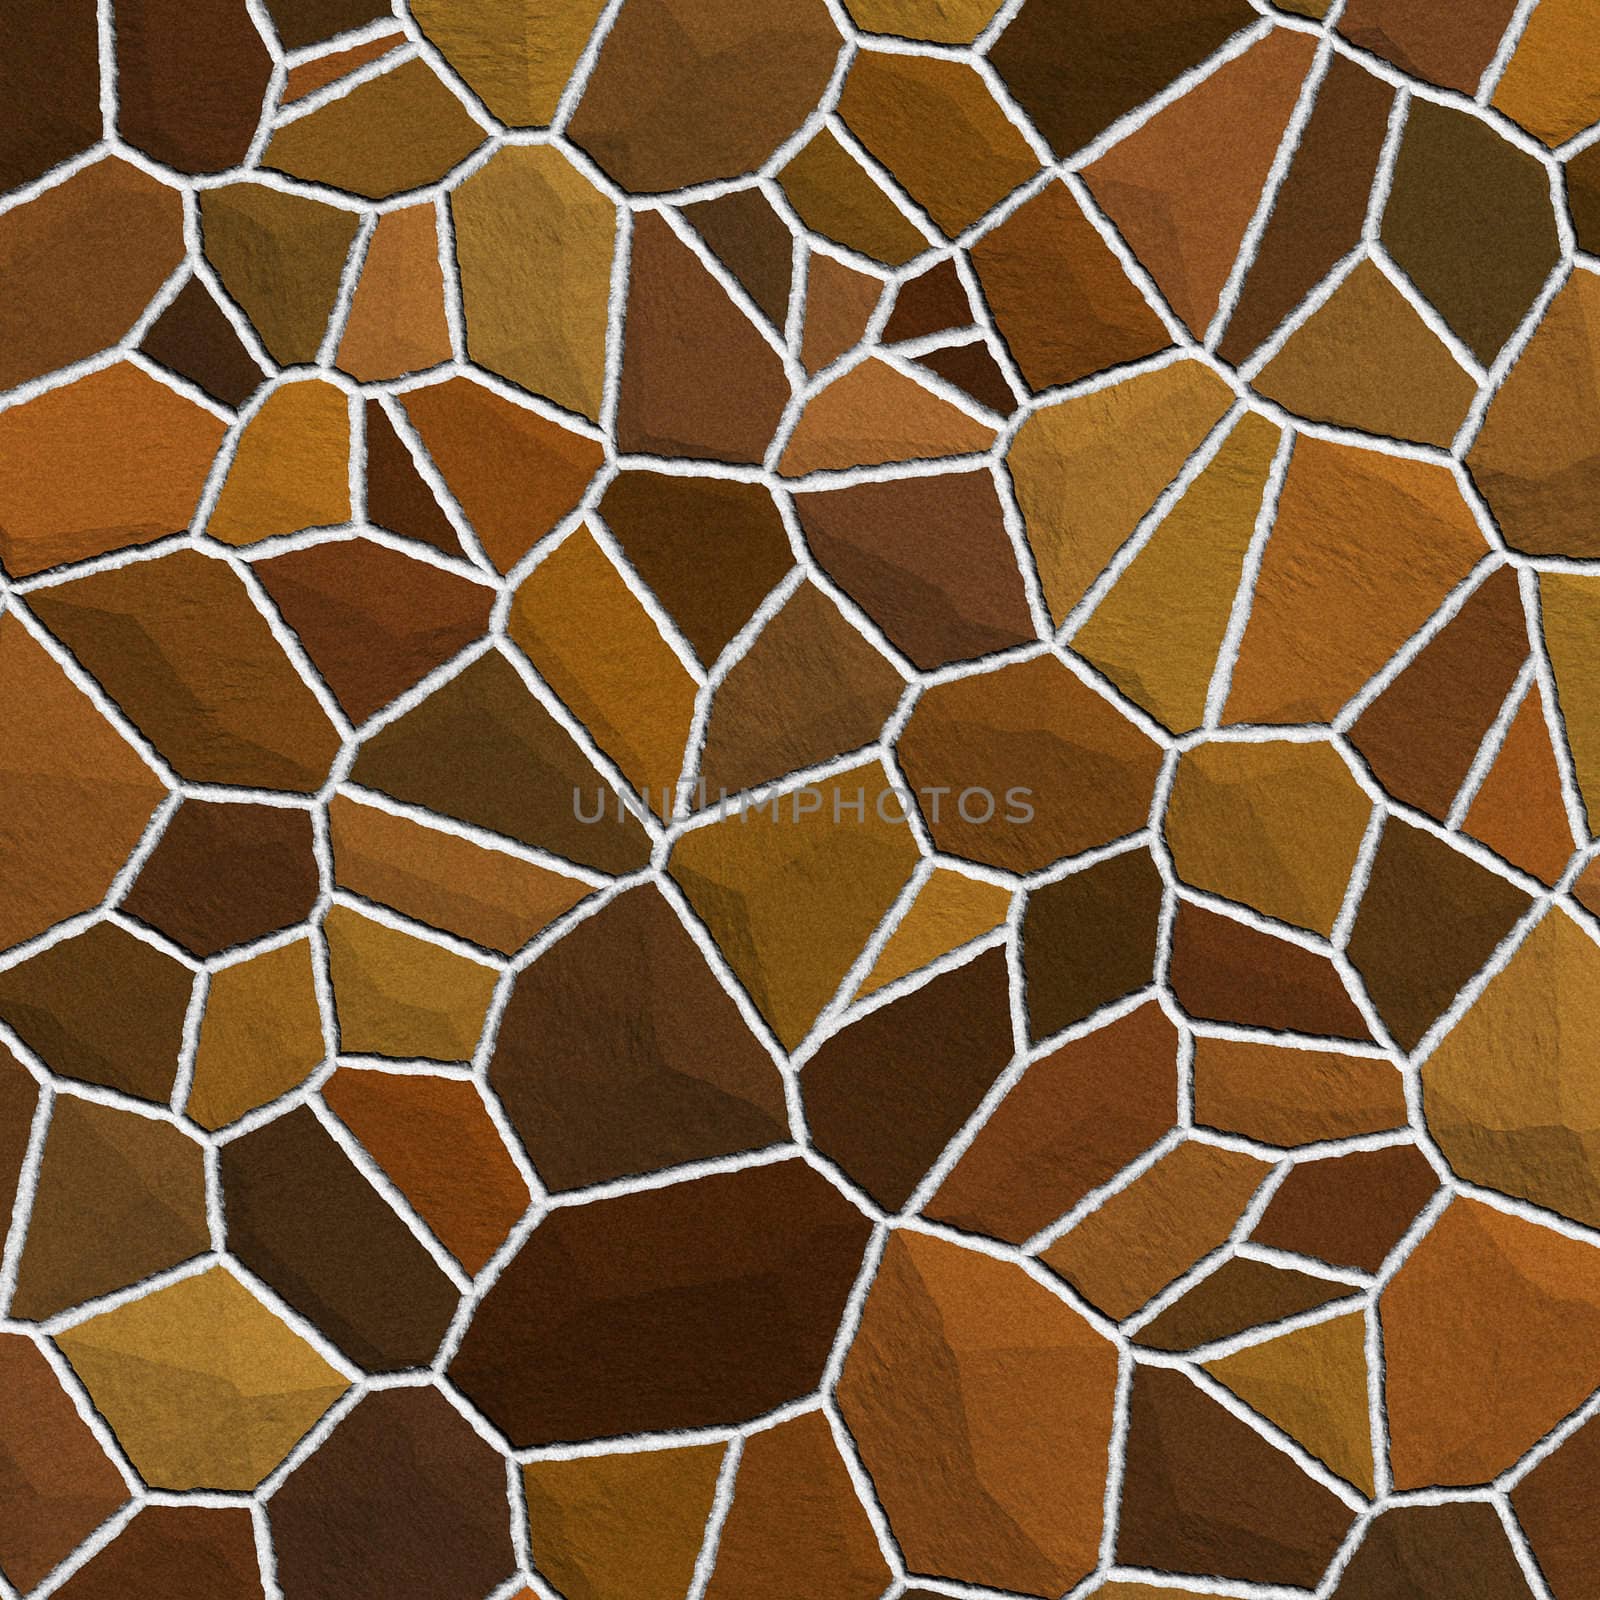 Stones texture in shades of brown by kmiragaya